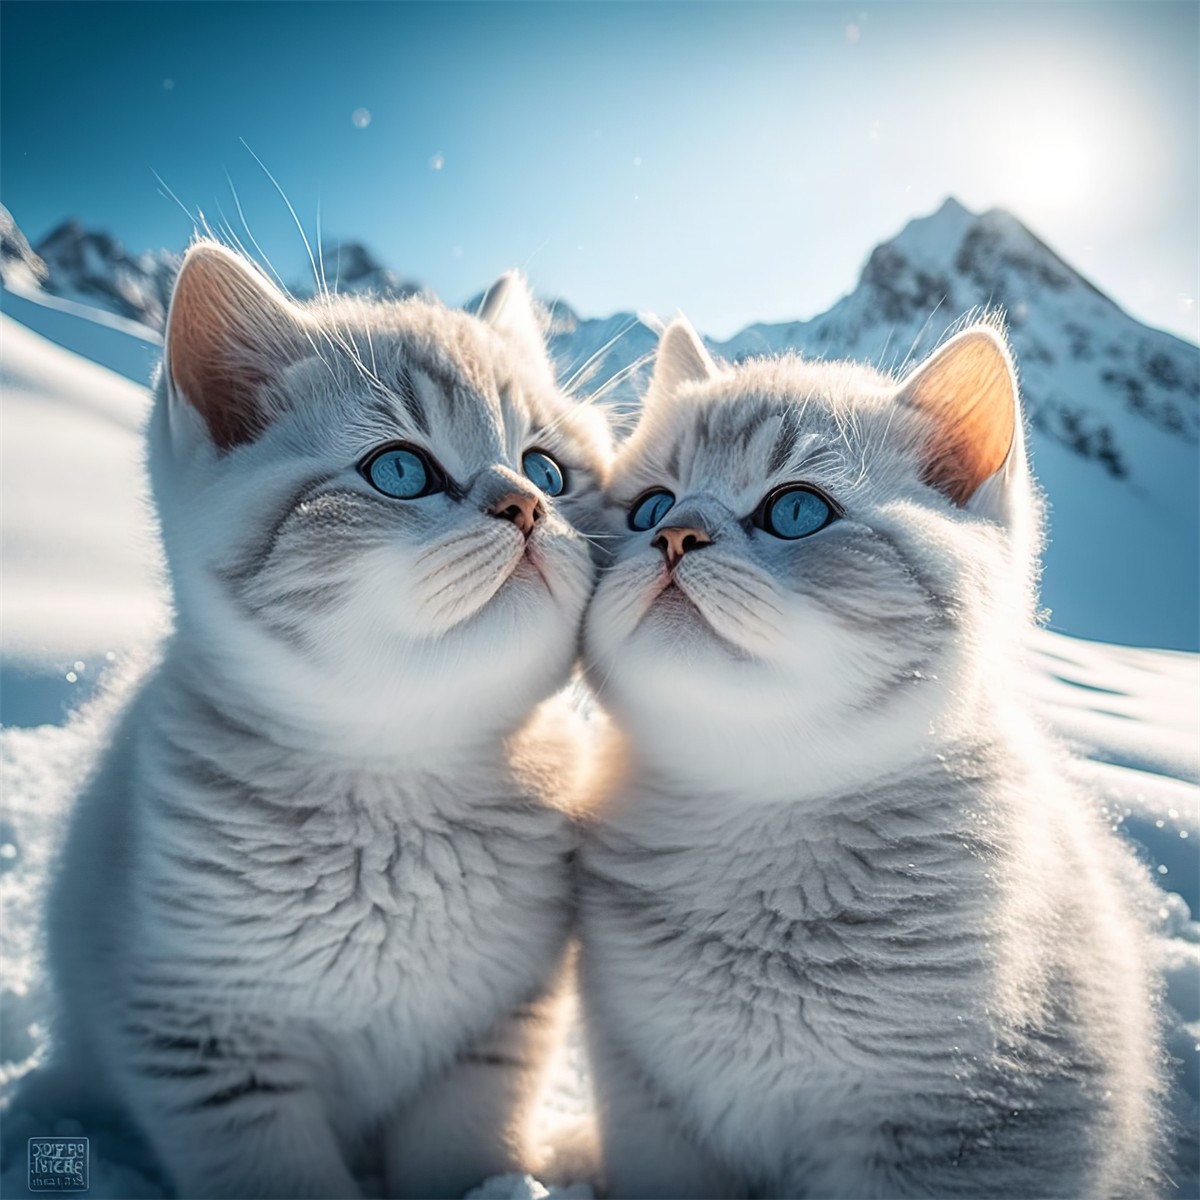 Head portrait of two kittens in the snow